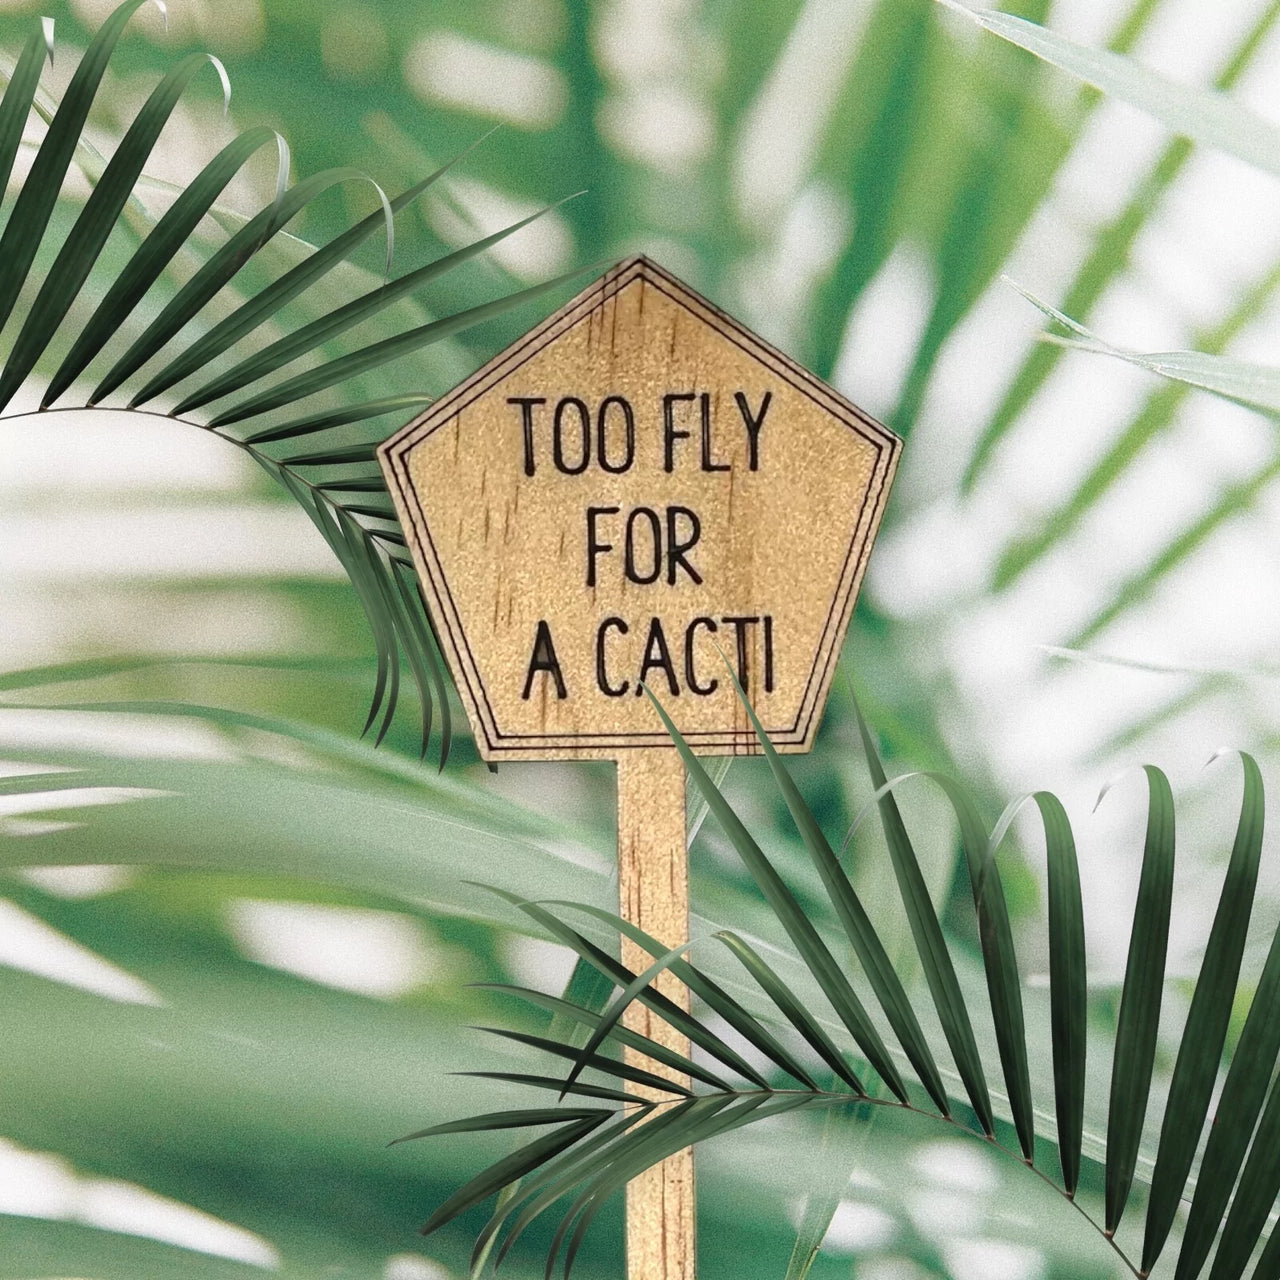 Funny Plant Stakes - Made from Sustainable Timber - TOO FLY FOR A CACTI